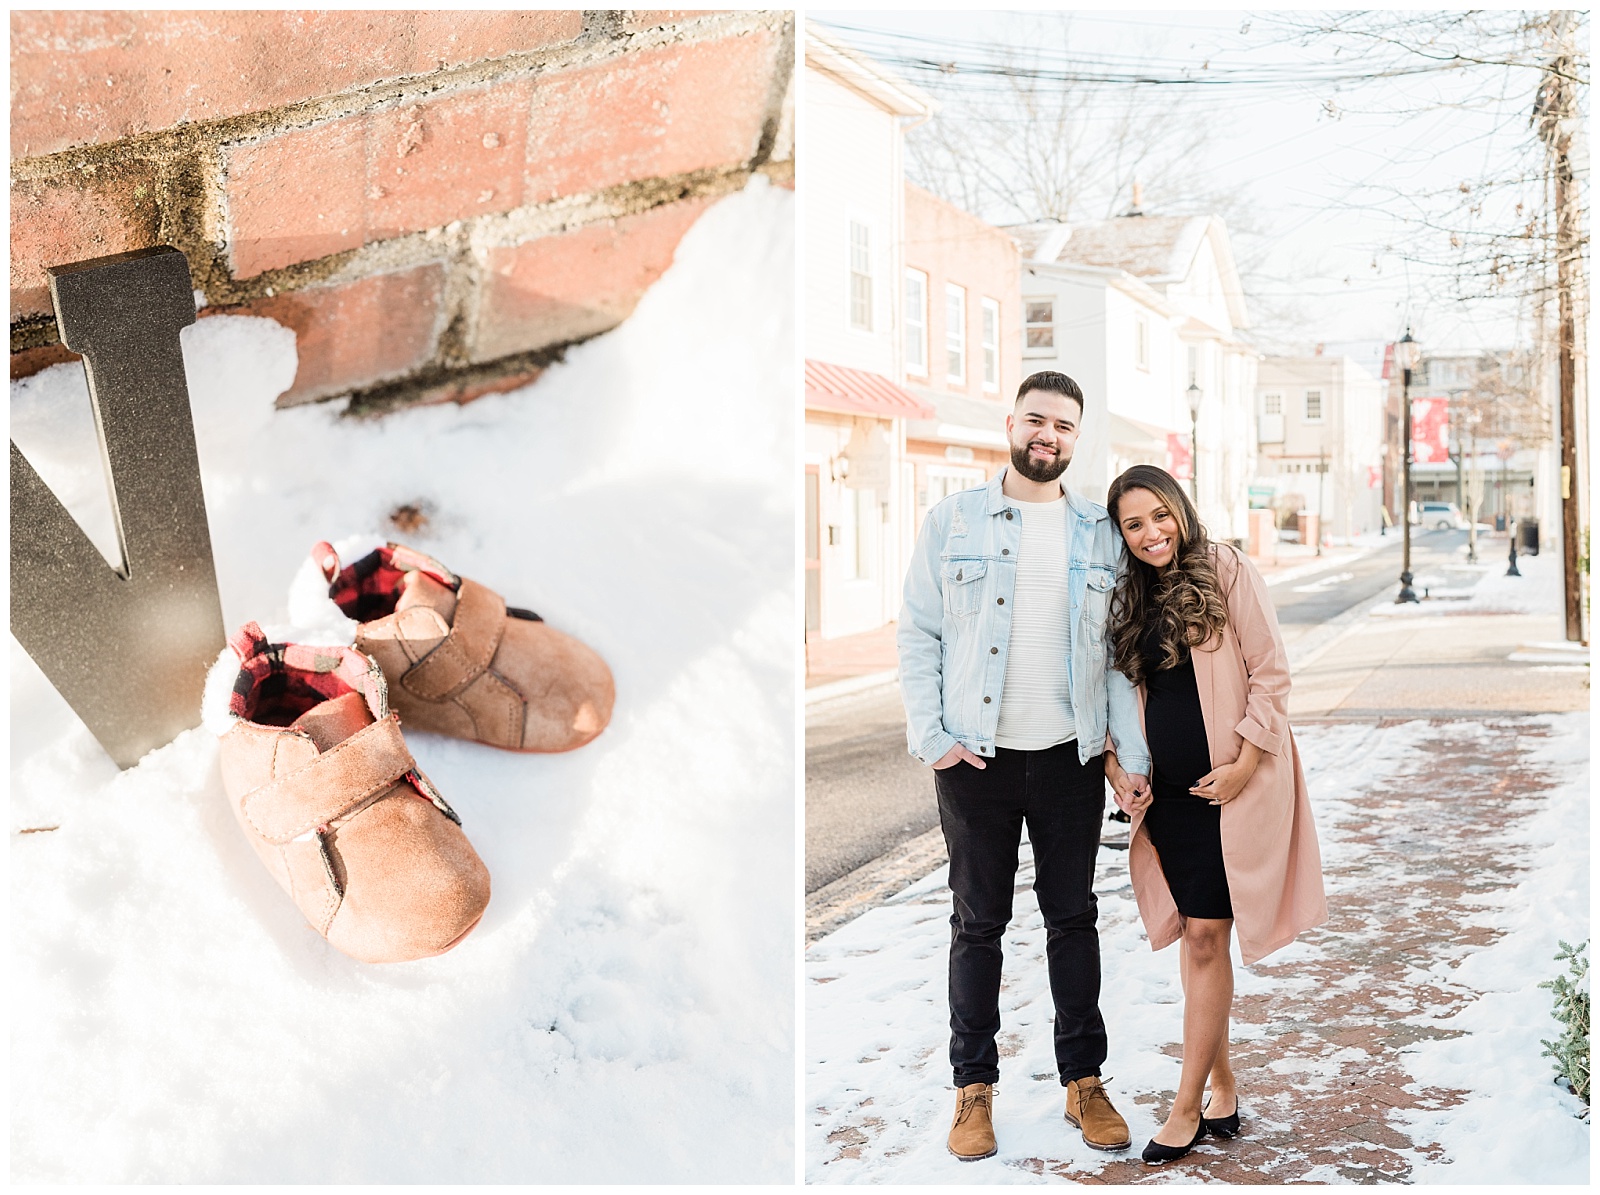 Maternity Session, Family, Baby, New Parents, Maternity Shoot, Pregnant, Pregnancy Photos, New Jersey, Photographer, Haddonfield, NJ, Haddon Heights, Town, Snowy, Winter, baby shoes